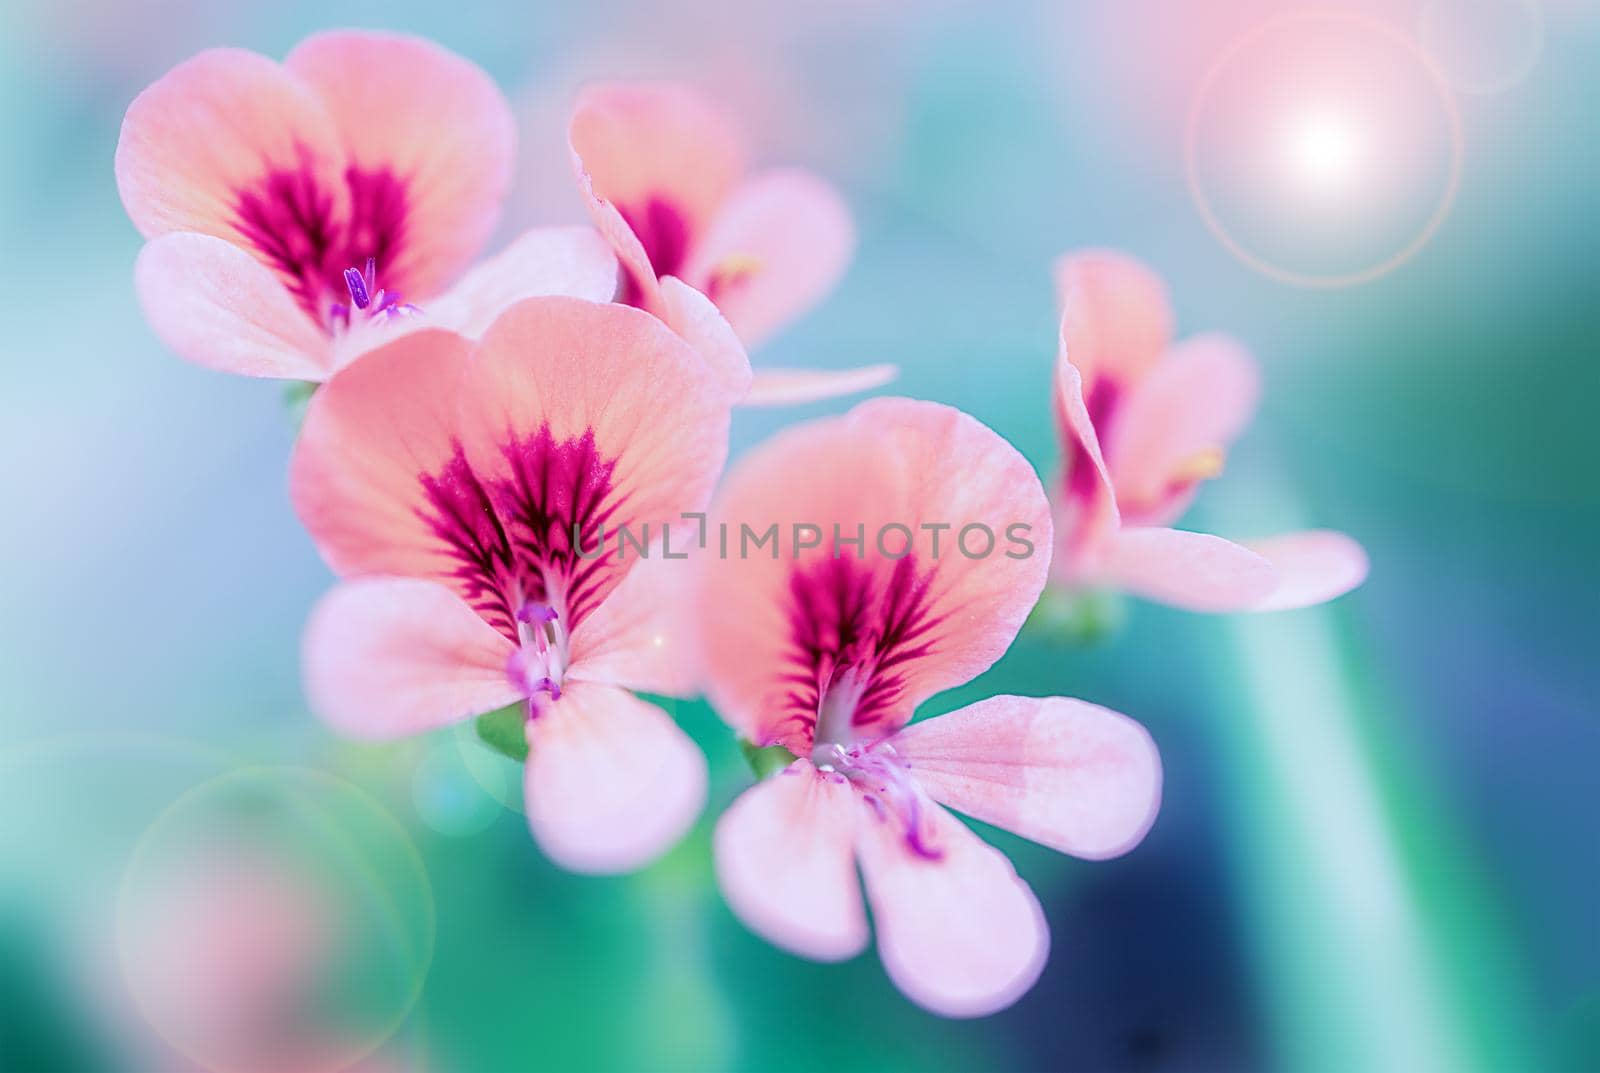 Bright pink flowers outdoors in summer and spring close-up on a turquoise background with soft selective focus. Close-up of plants, macro. romantic image, beautiful postcard, phone screensaver, poster